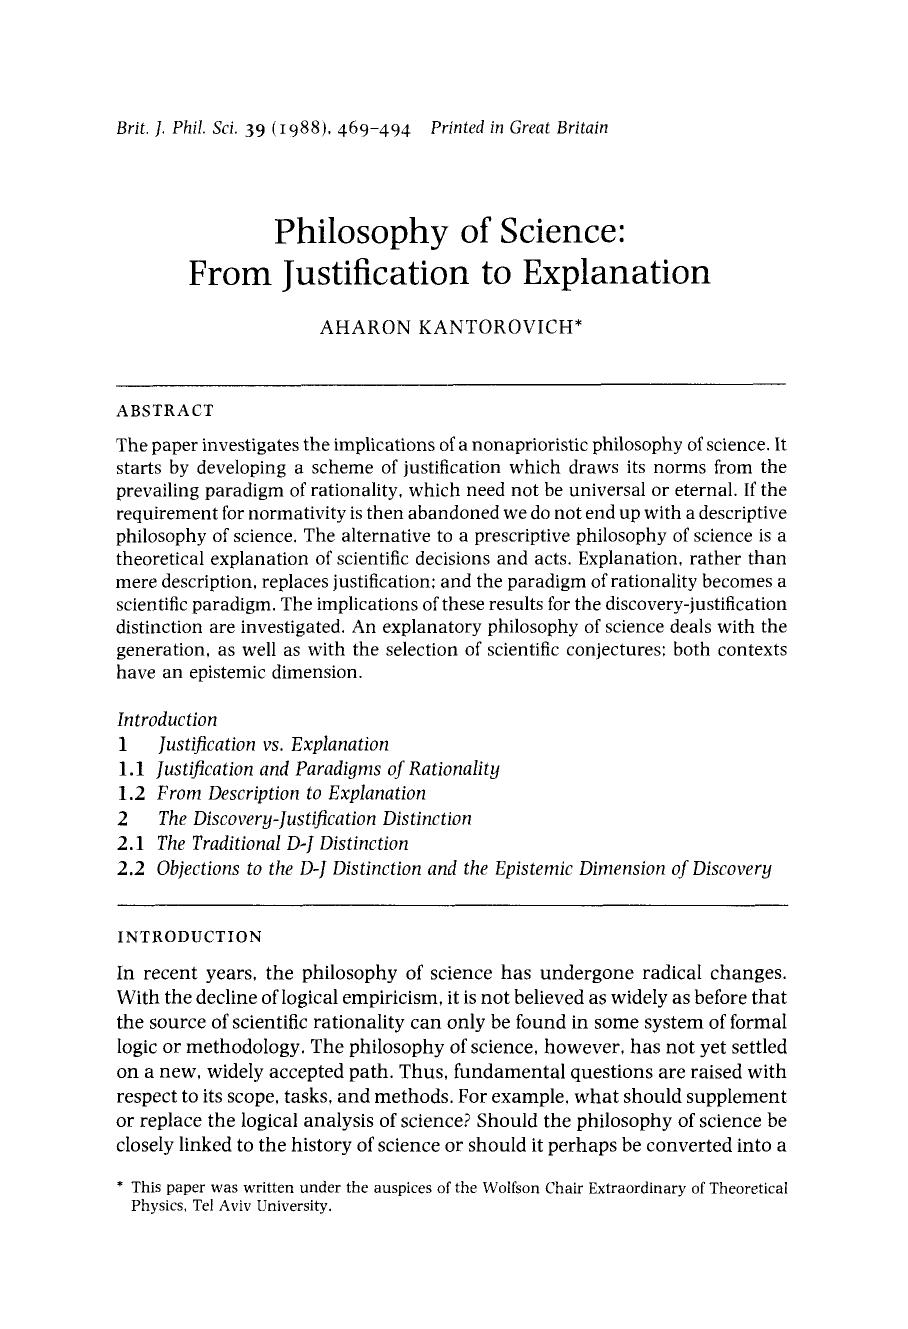 Philosophy of Science - From Justification - Paper